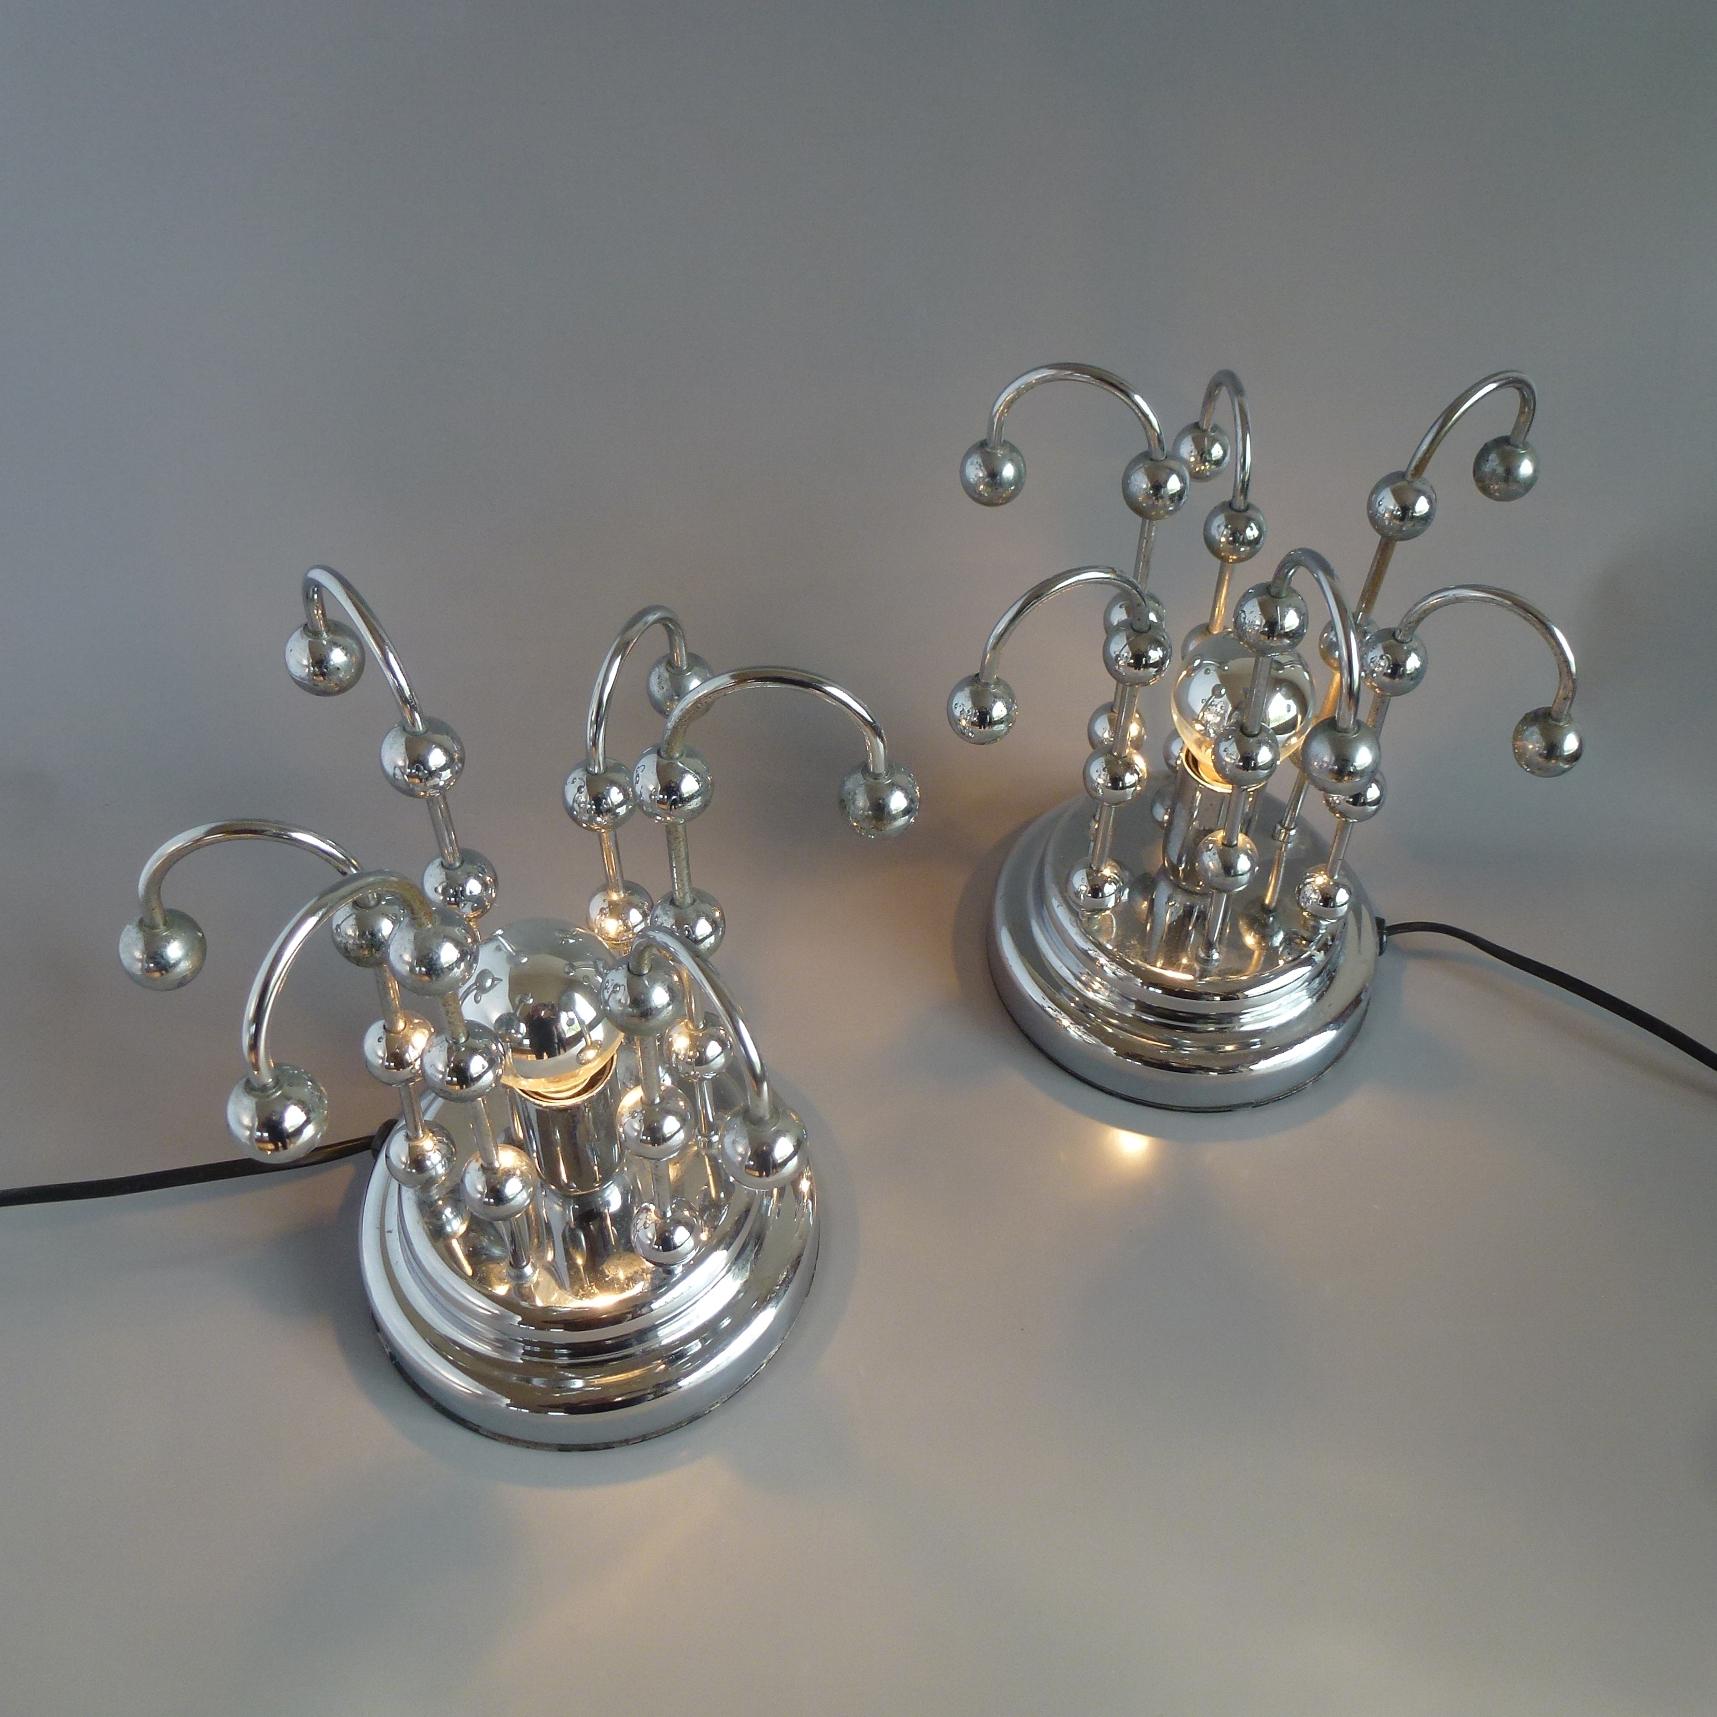 Pair of Mid-Century Space Age Chrome Table or Nightstand Lamps, Italy, 1960s For Sale 1